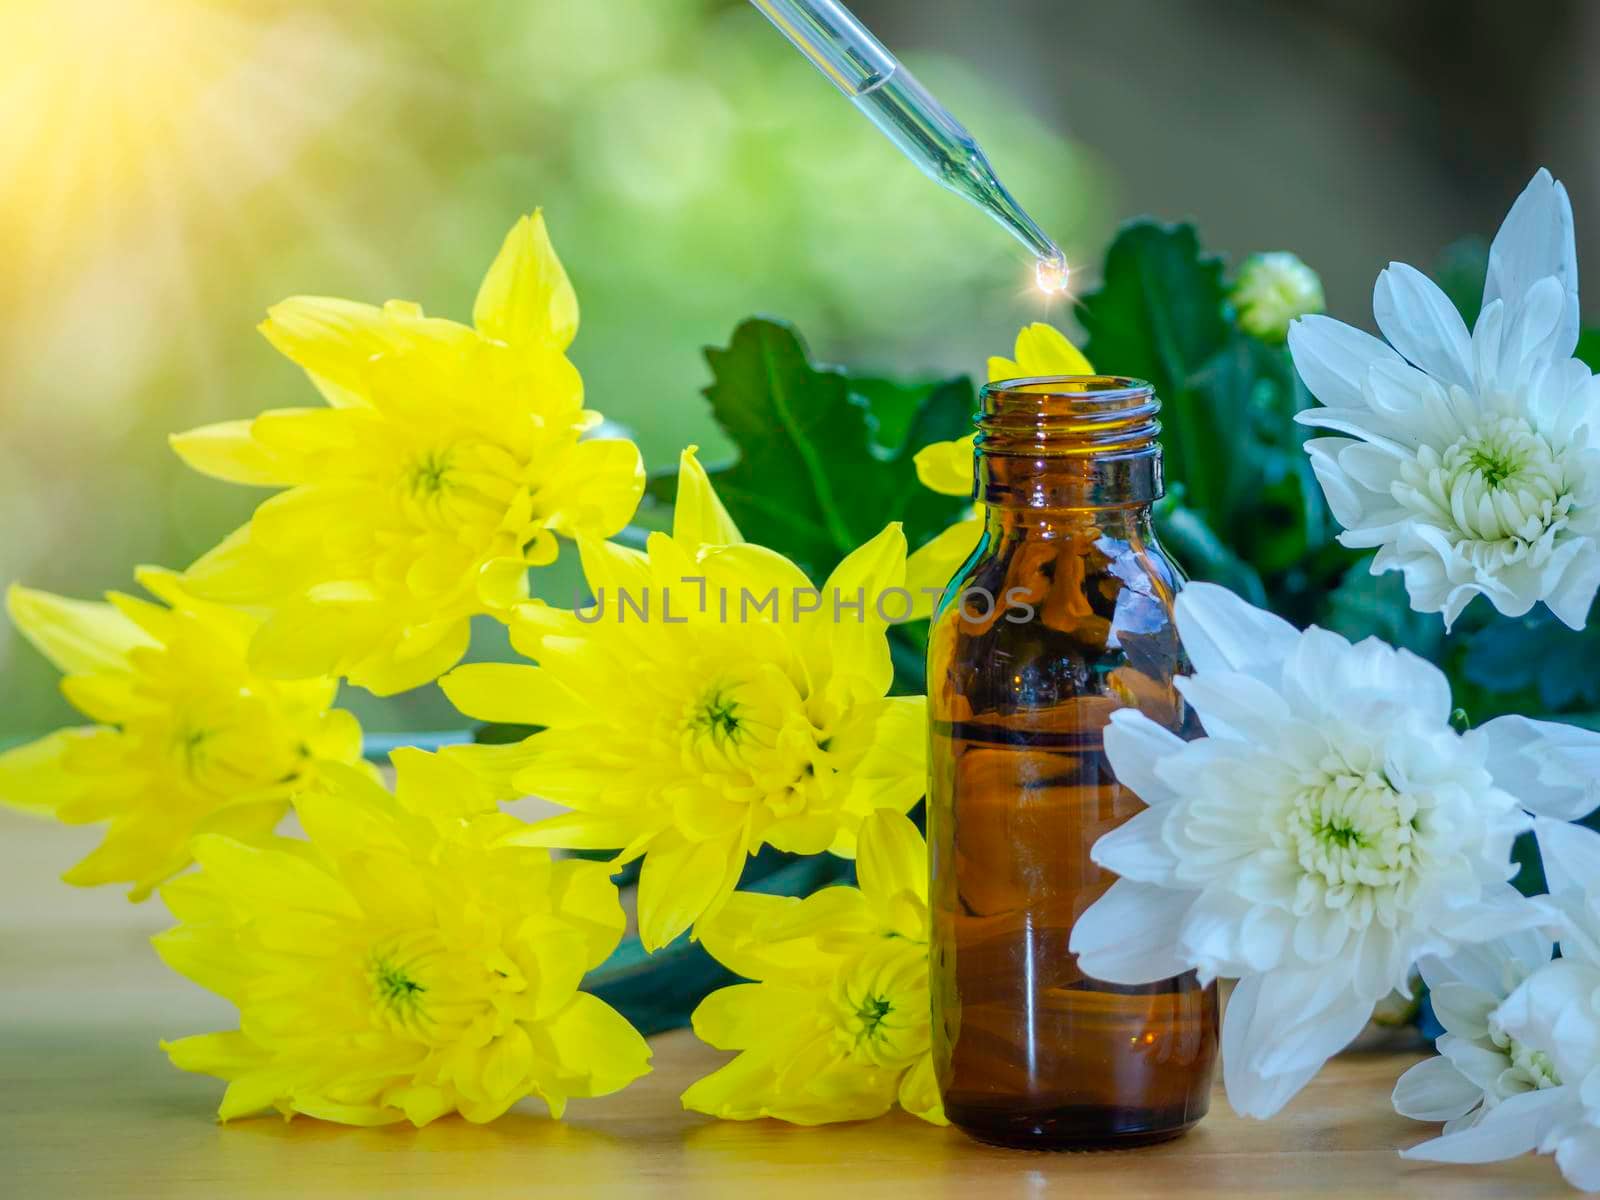 The essential oils extract and medical flowers herbs near the white and yellow flower on wooden table. The essential oil organic bio alternative medicine, brown bottle. by Chakreeyarut